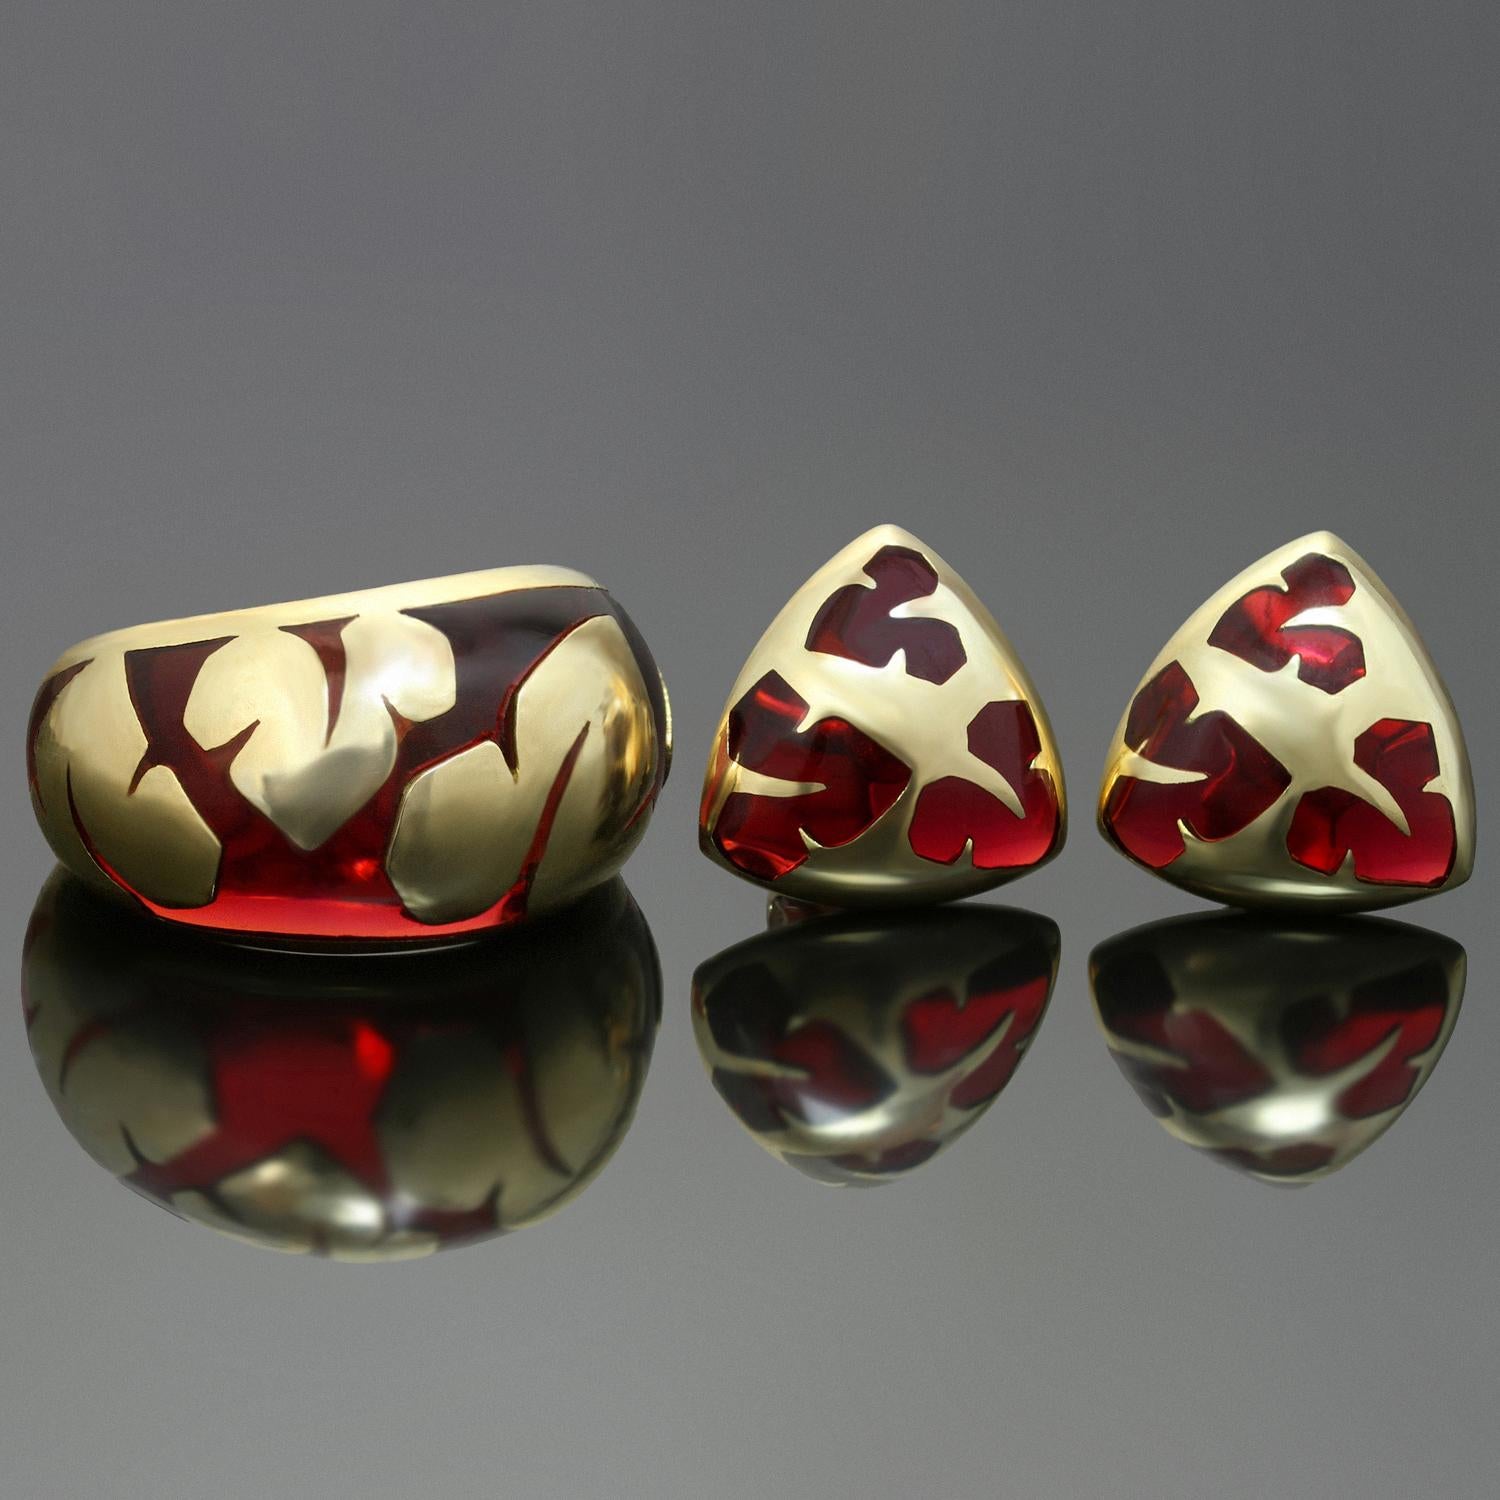 This fabulous ring and earrings set features a vibrant retro design of polished maroon glass and 18k yellow gold. Made in France circa 1970s. Measurements: 0.51